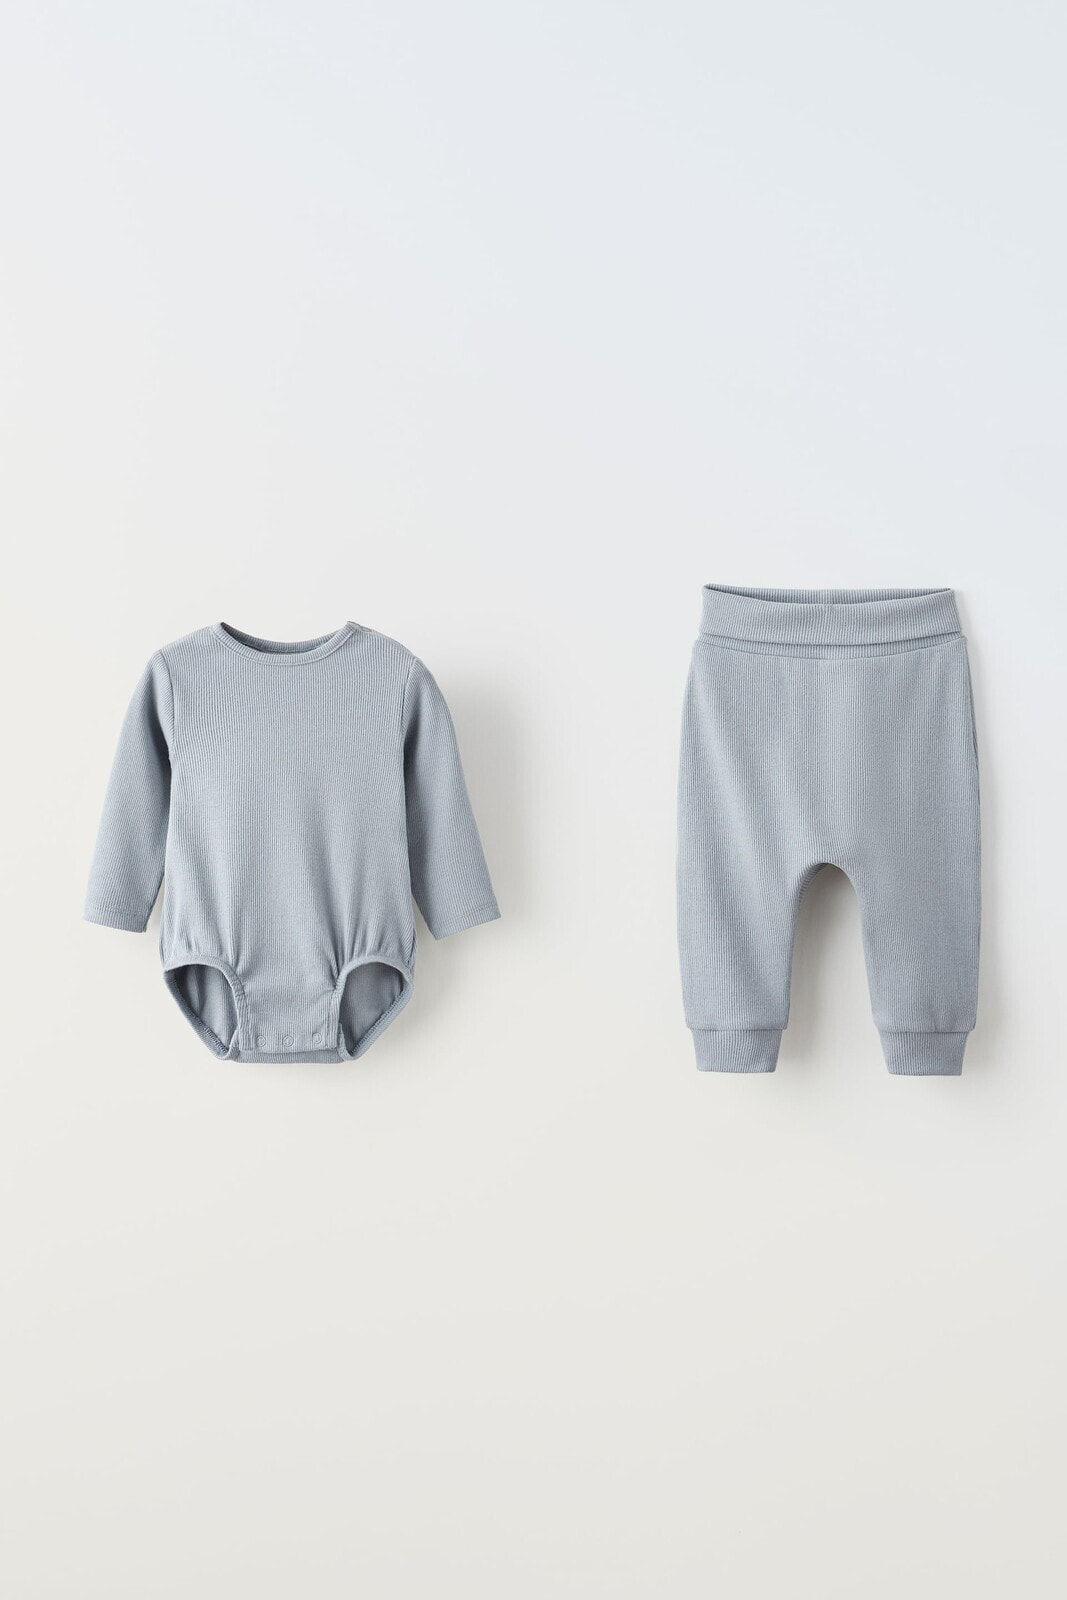 Plain ribbed bodysuit and joggers pack